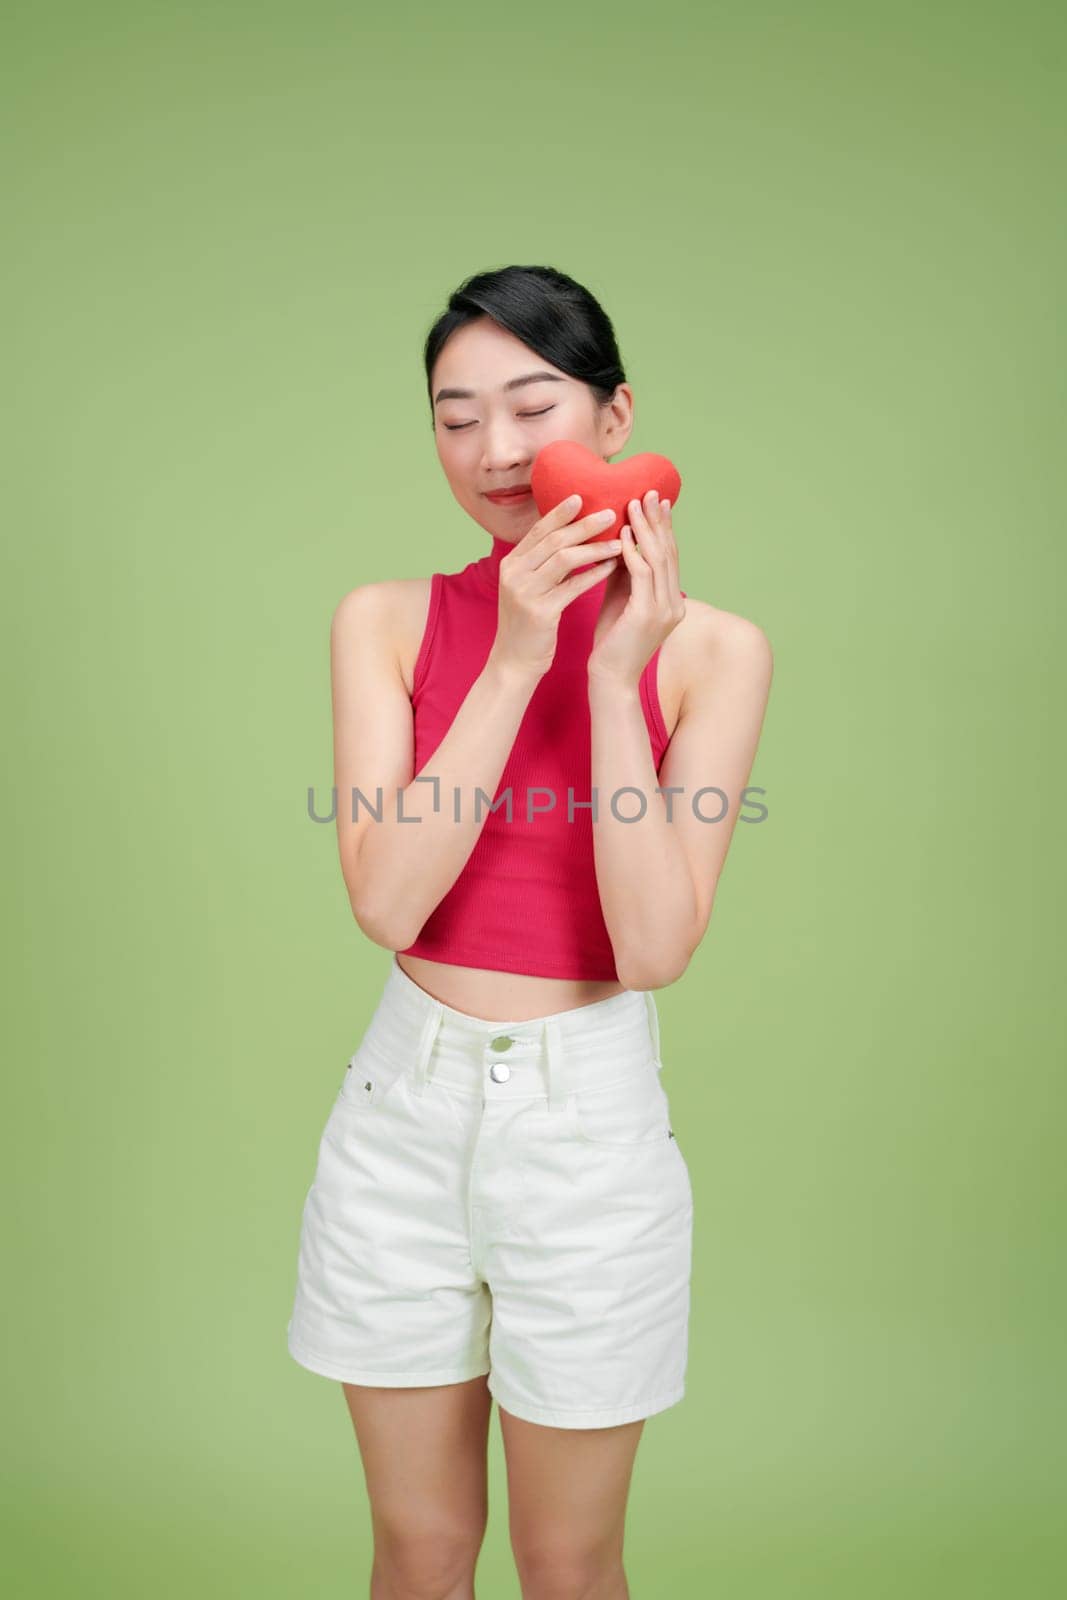 Love and valentines day woman holding heart smiling cute and adorable isolated on green background